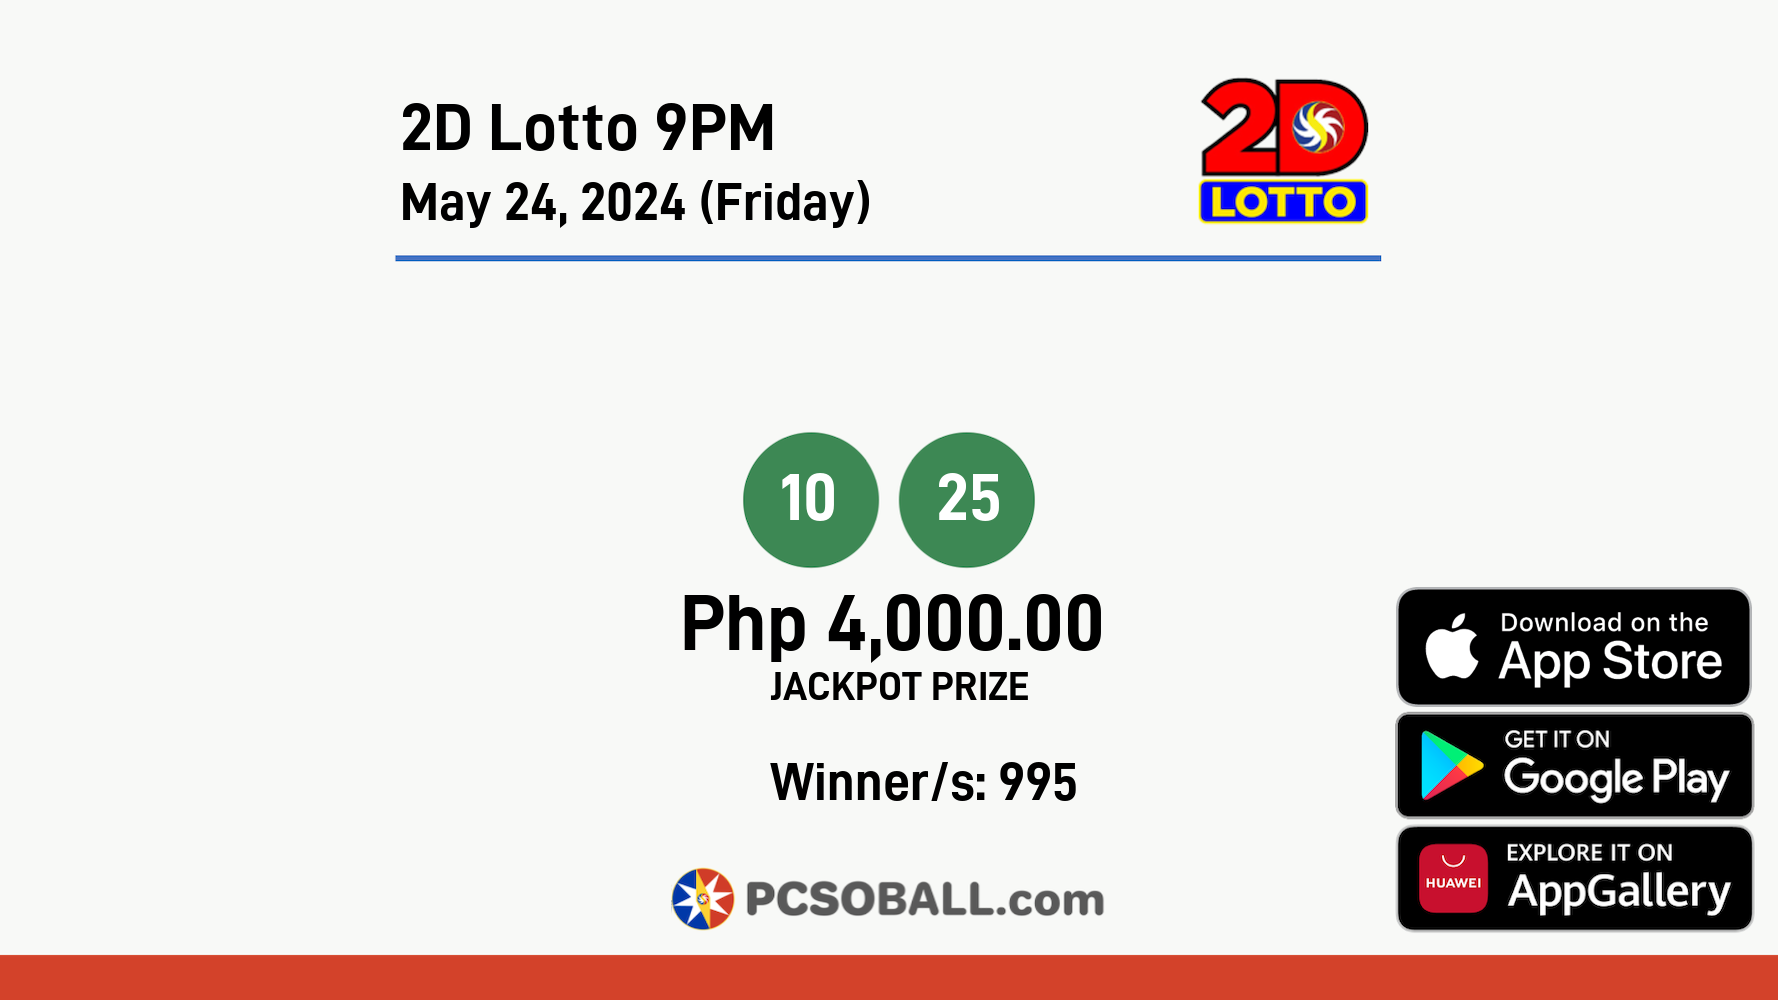 2D Lotto 9PM May 24, 2024 (Friday) Result